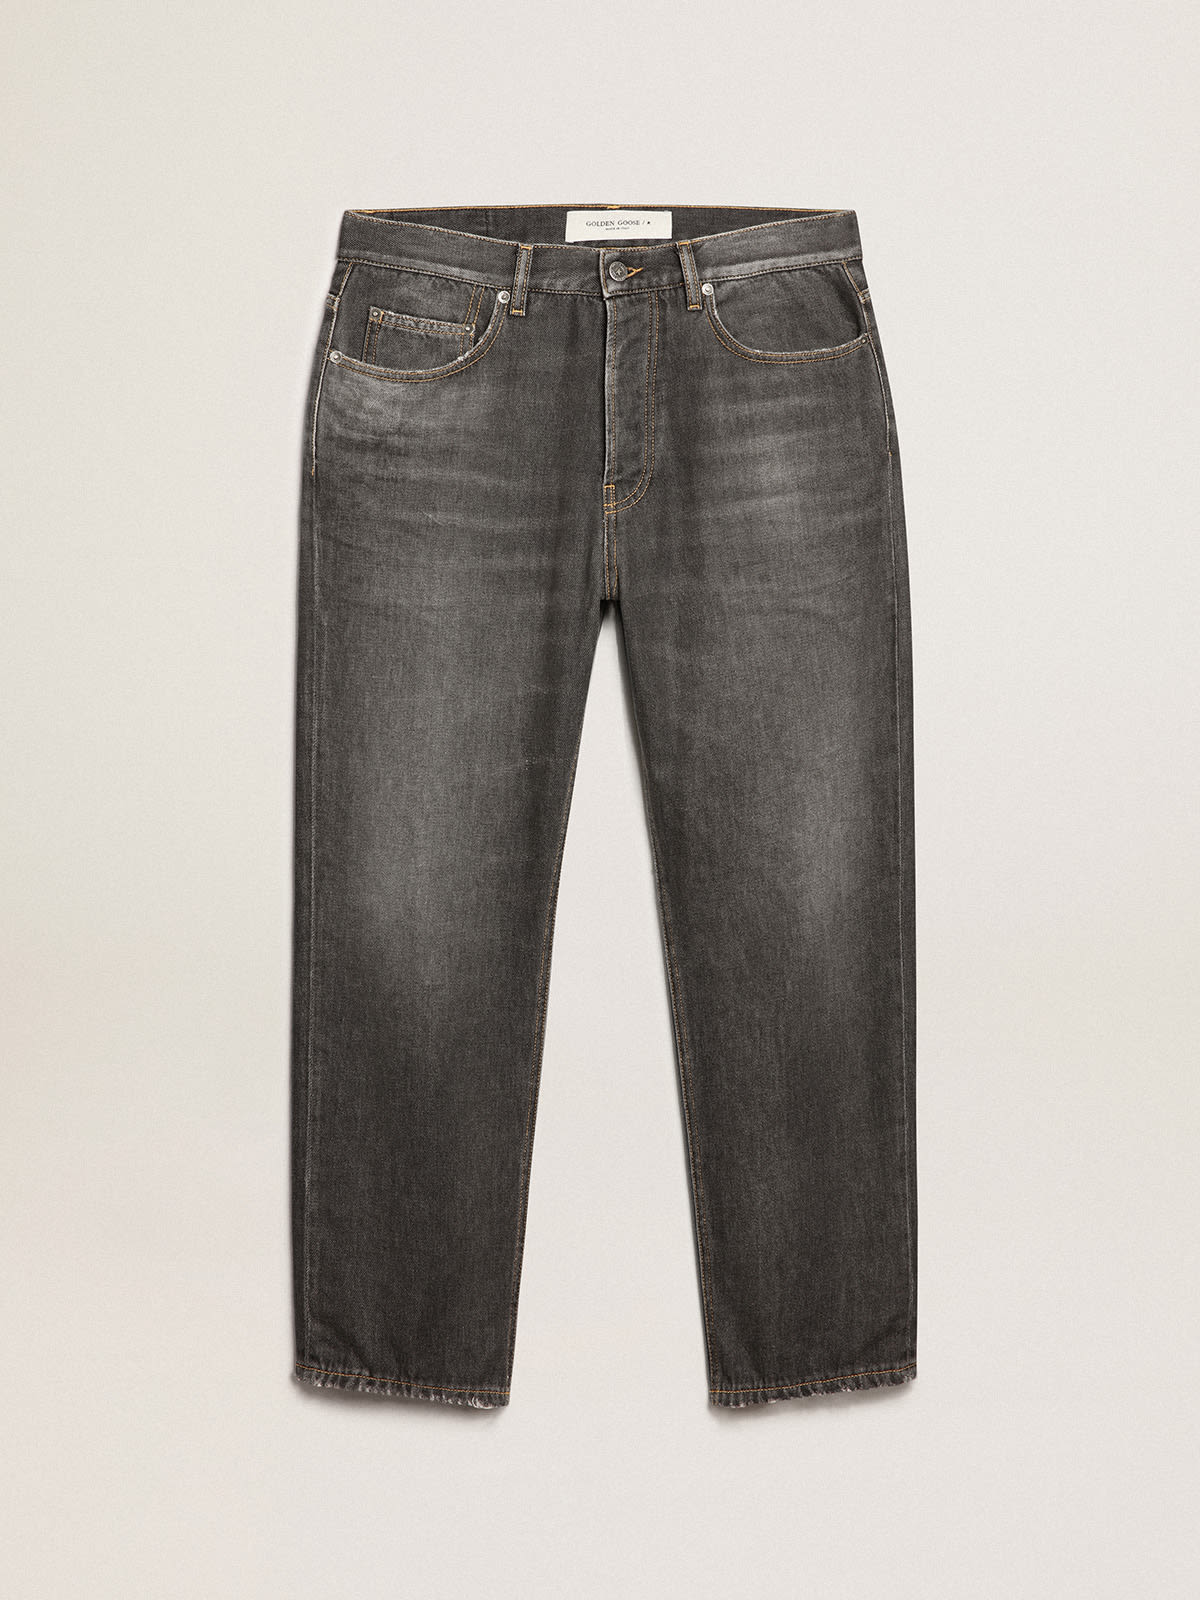 Golden Goose - Men's black jeans with stonewashed effect in 